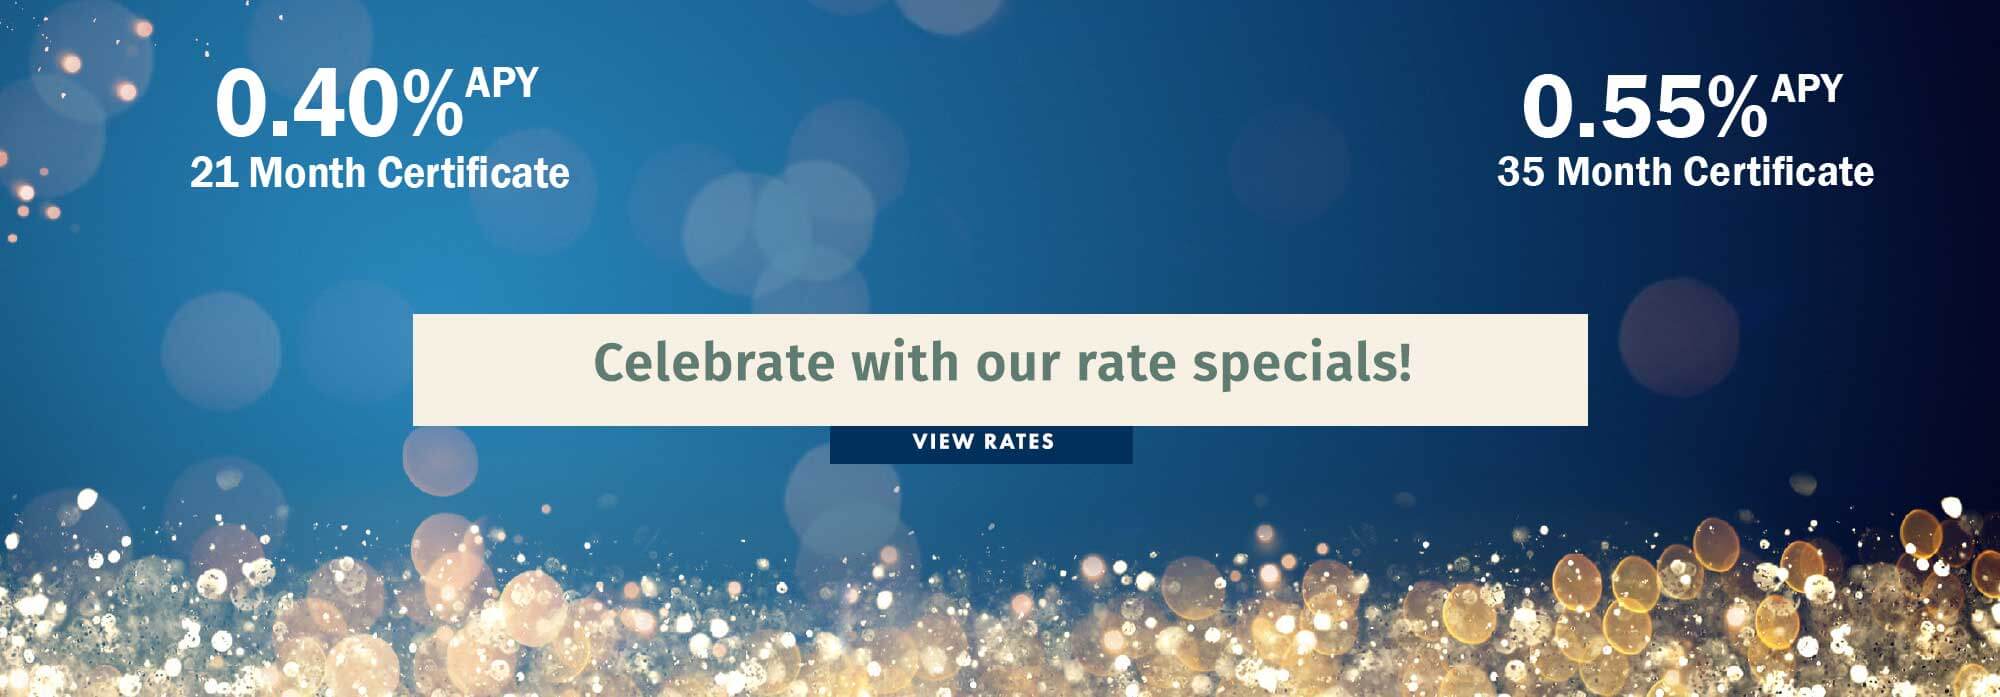 Celebrate with our rate specials! 0.40% APY 21 month certificate. 0.55% APY 35 month certificate. View rates.